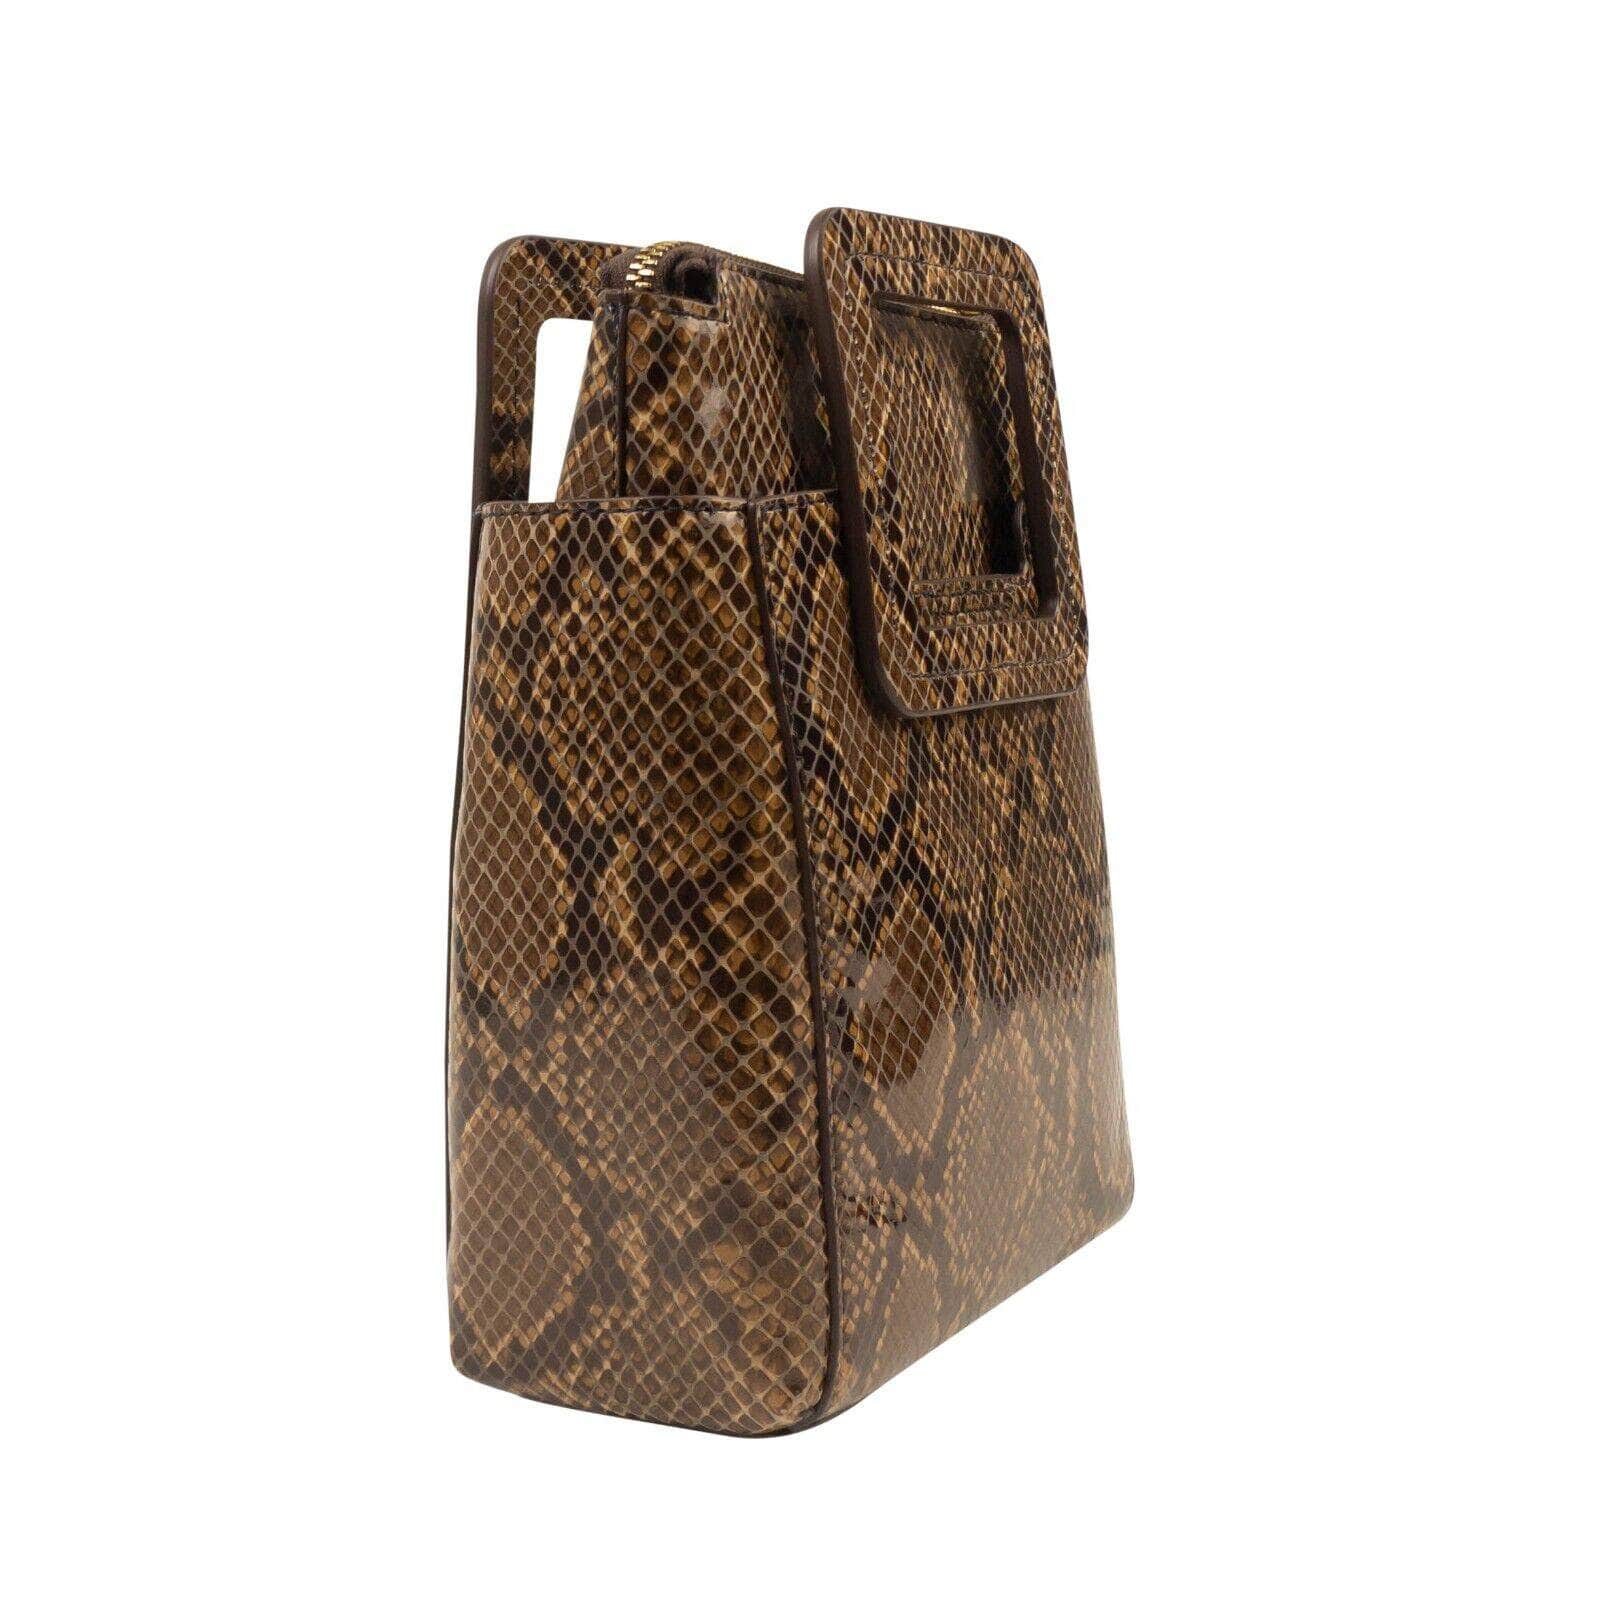 Staud channelenable-all, chicmi, couponcollection, gender-womens, main-handbags, MixedApparel, size-os, staud, under-250, womens-clutches-pouches OS Caramel Brown Snake Mini Shirley Bag 95-STD-3006/OS 95-STD-3006/OS